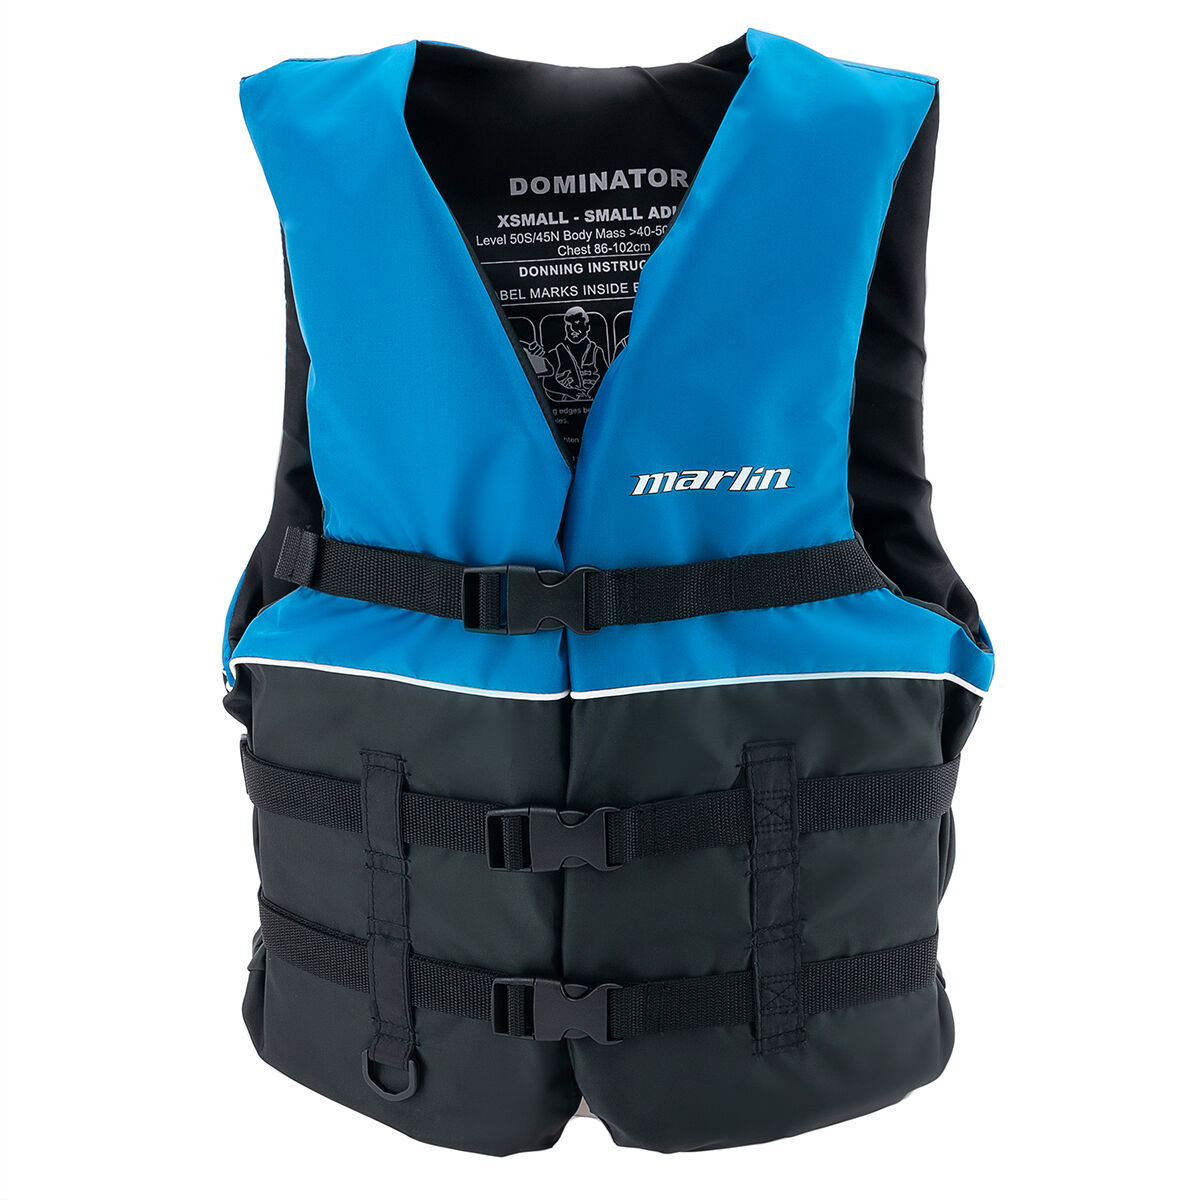 Buy TRAY Children and Adult Life Jacket Buoyancy Aid Universal Swimming  Boating Kayaking Life Vest+Whistle S-XXL 2 Sizes Suit for 15-110 KG (Adult  Size (15 up yr)) Online at Low Prices in